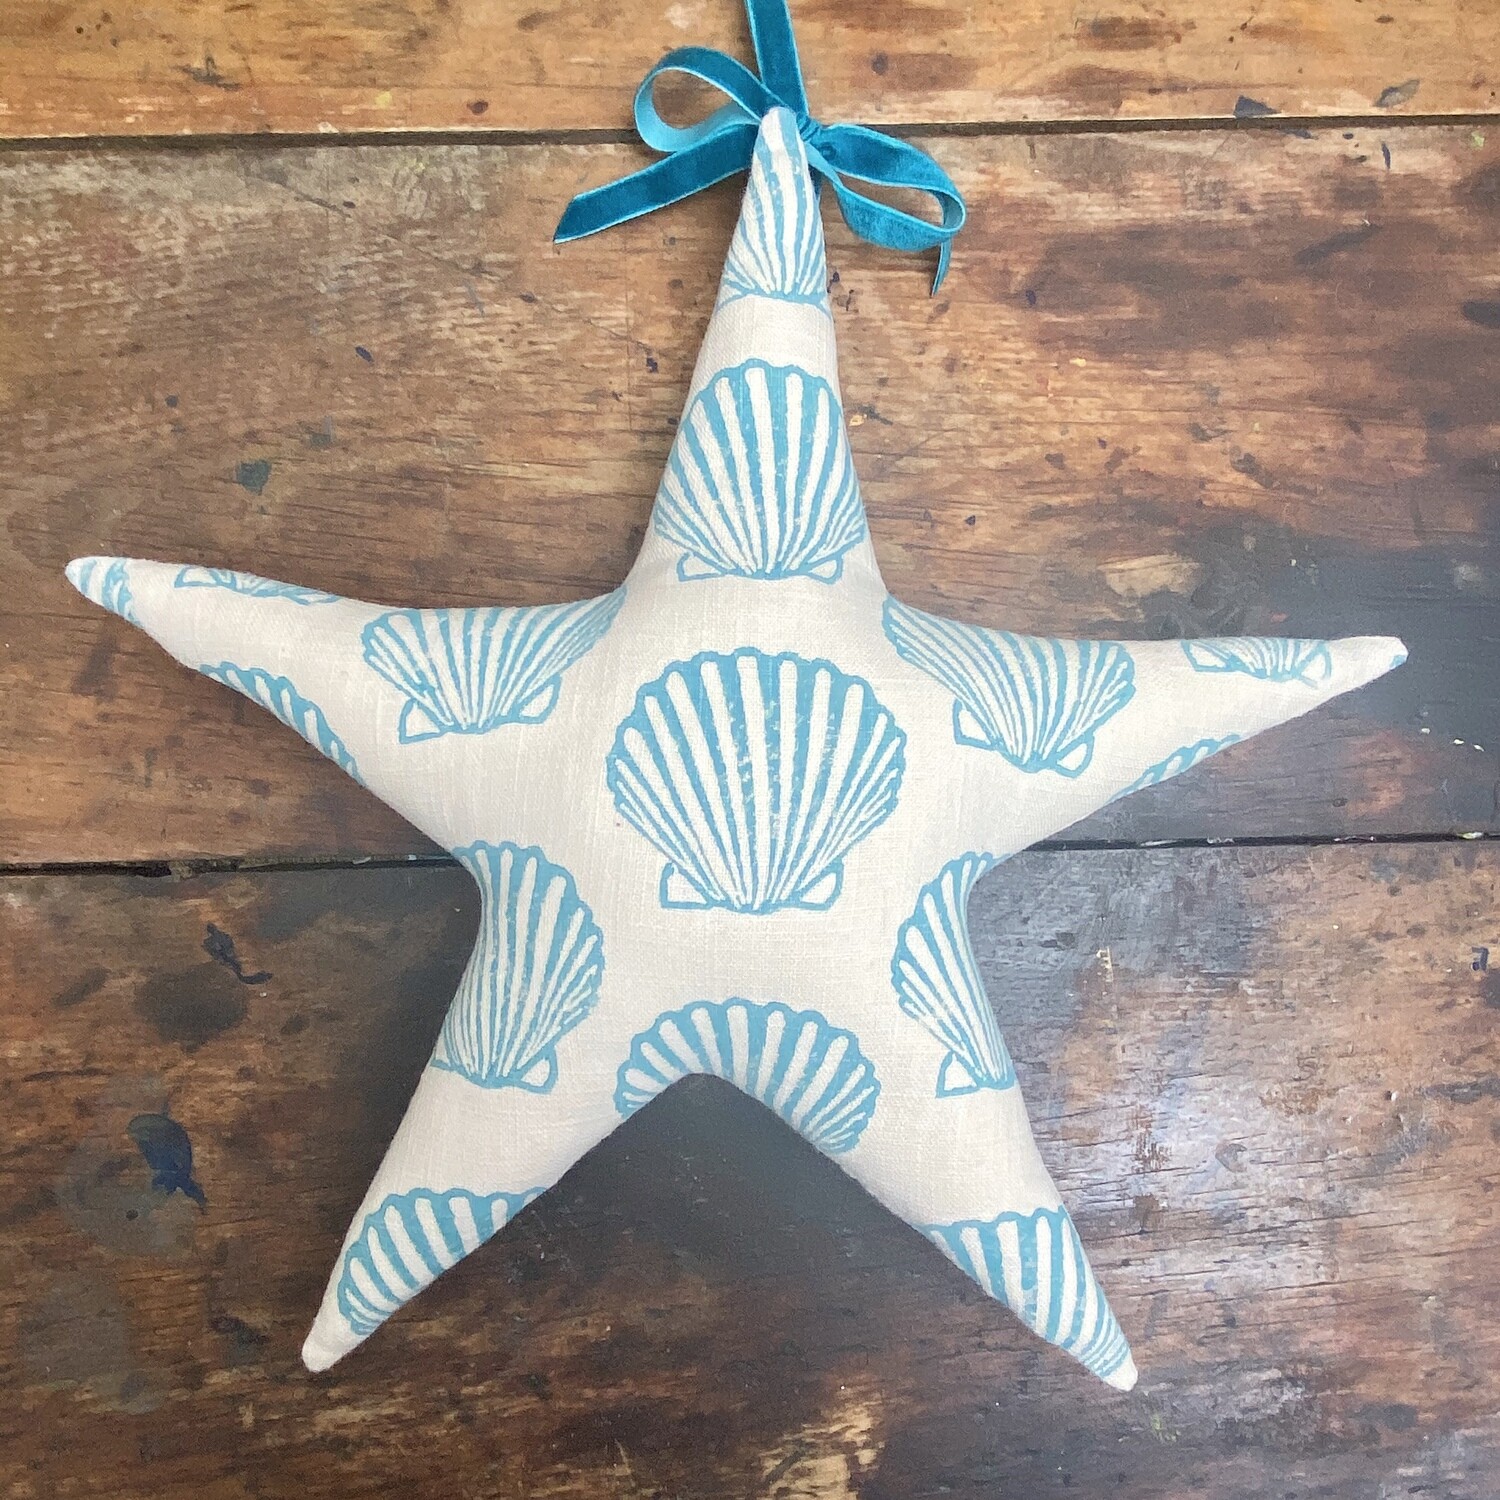 Christmas Star Decoration - Scallop Shell
Teal